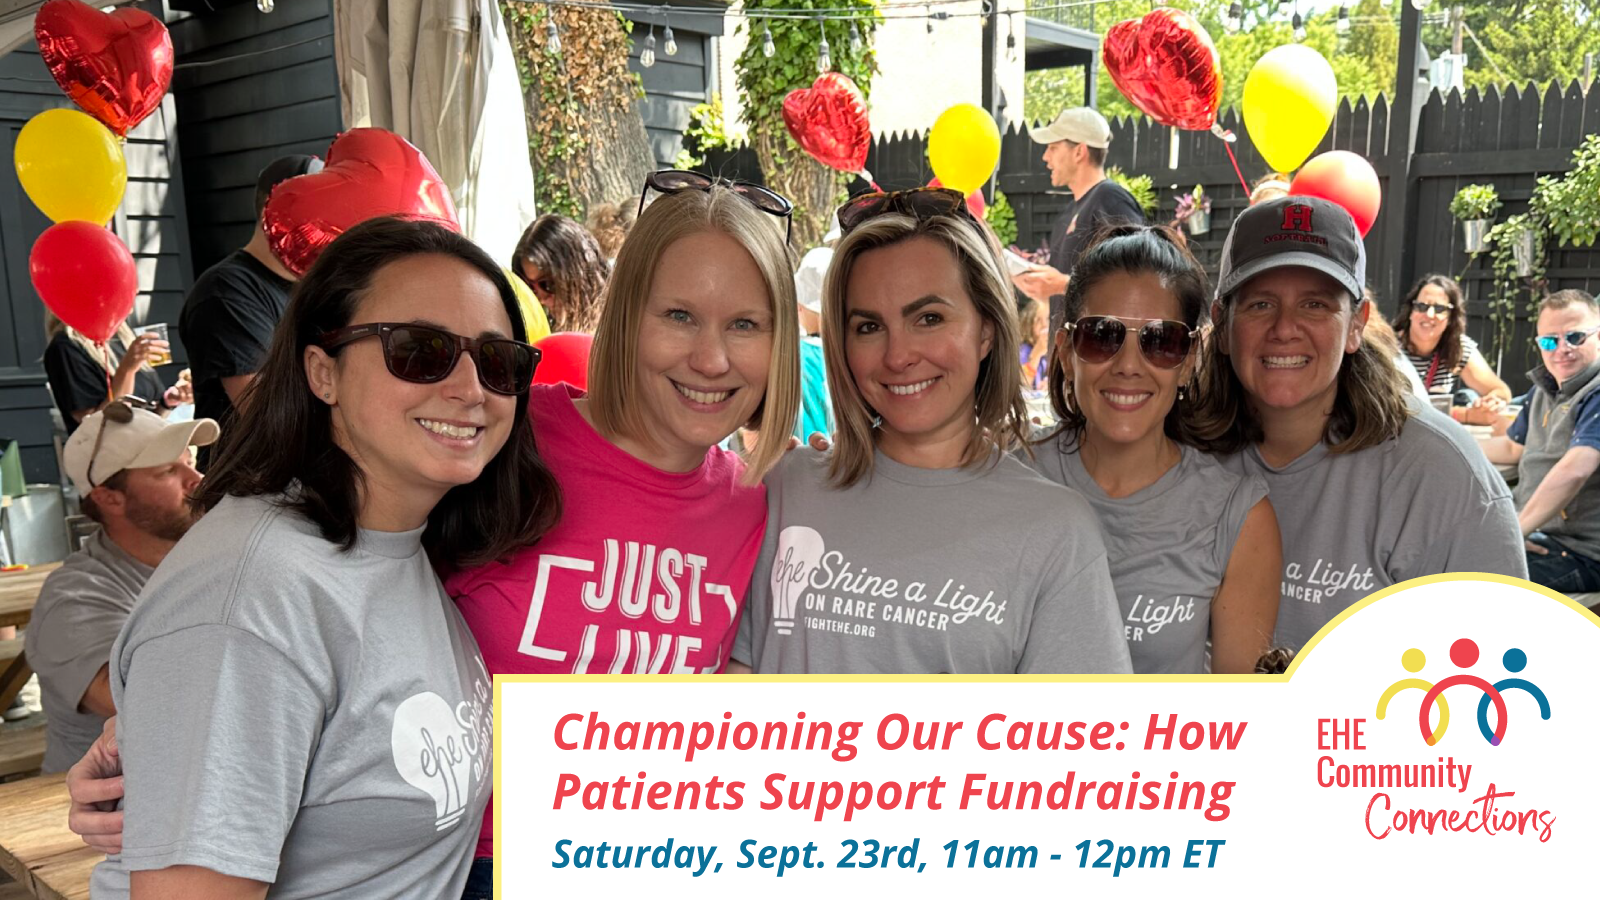 EHE Community Connections: Championing Our Cause - How patients drive fundraising support